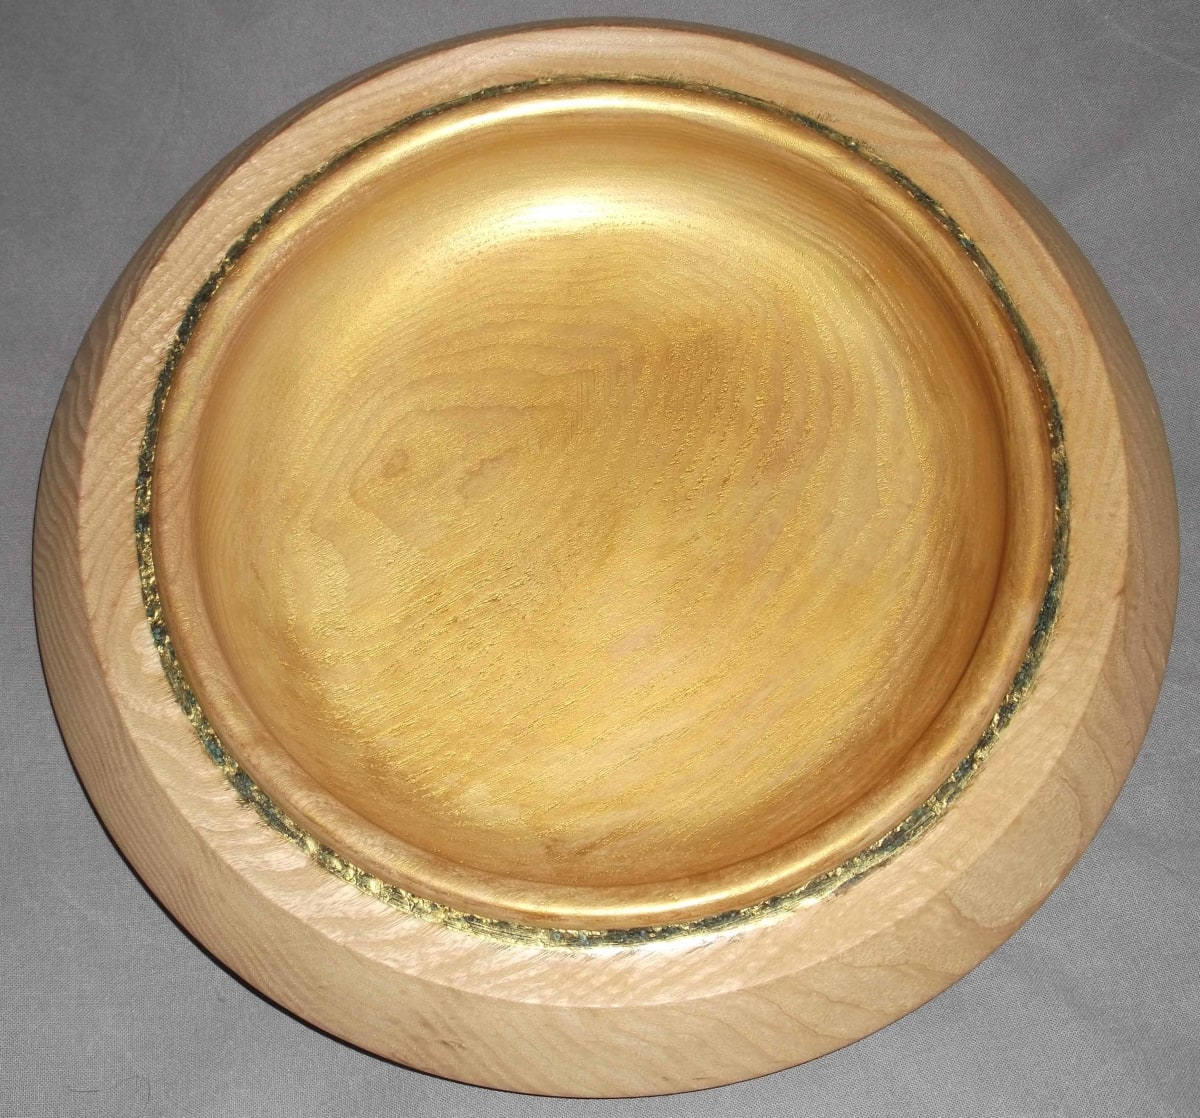 Gilded Shallow (Ash Wood) Bowl by David Downie  Image: GILDED SHALLOW (Ash Wood) BOWL by David Downie